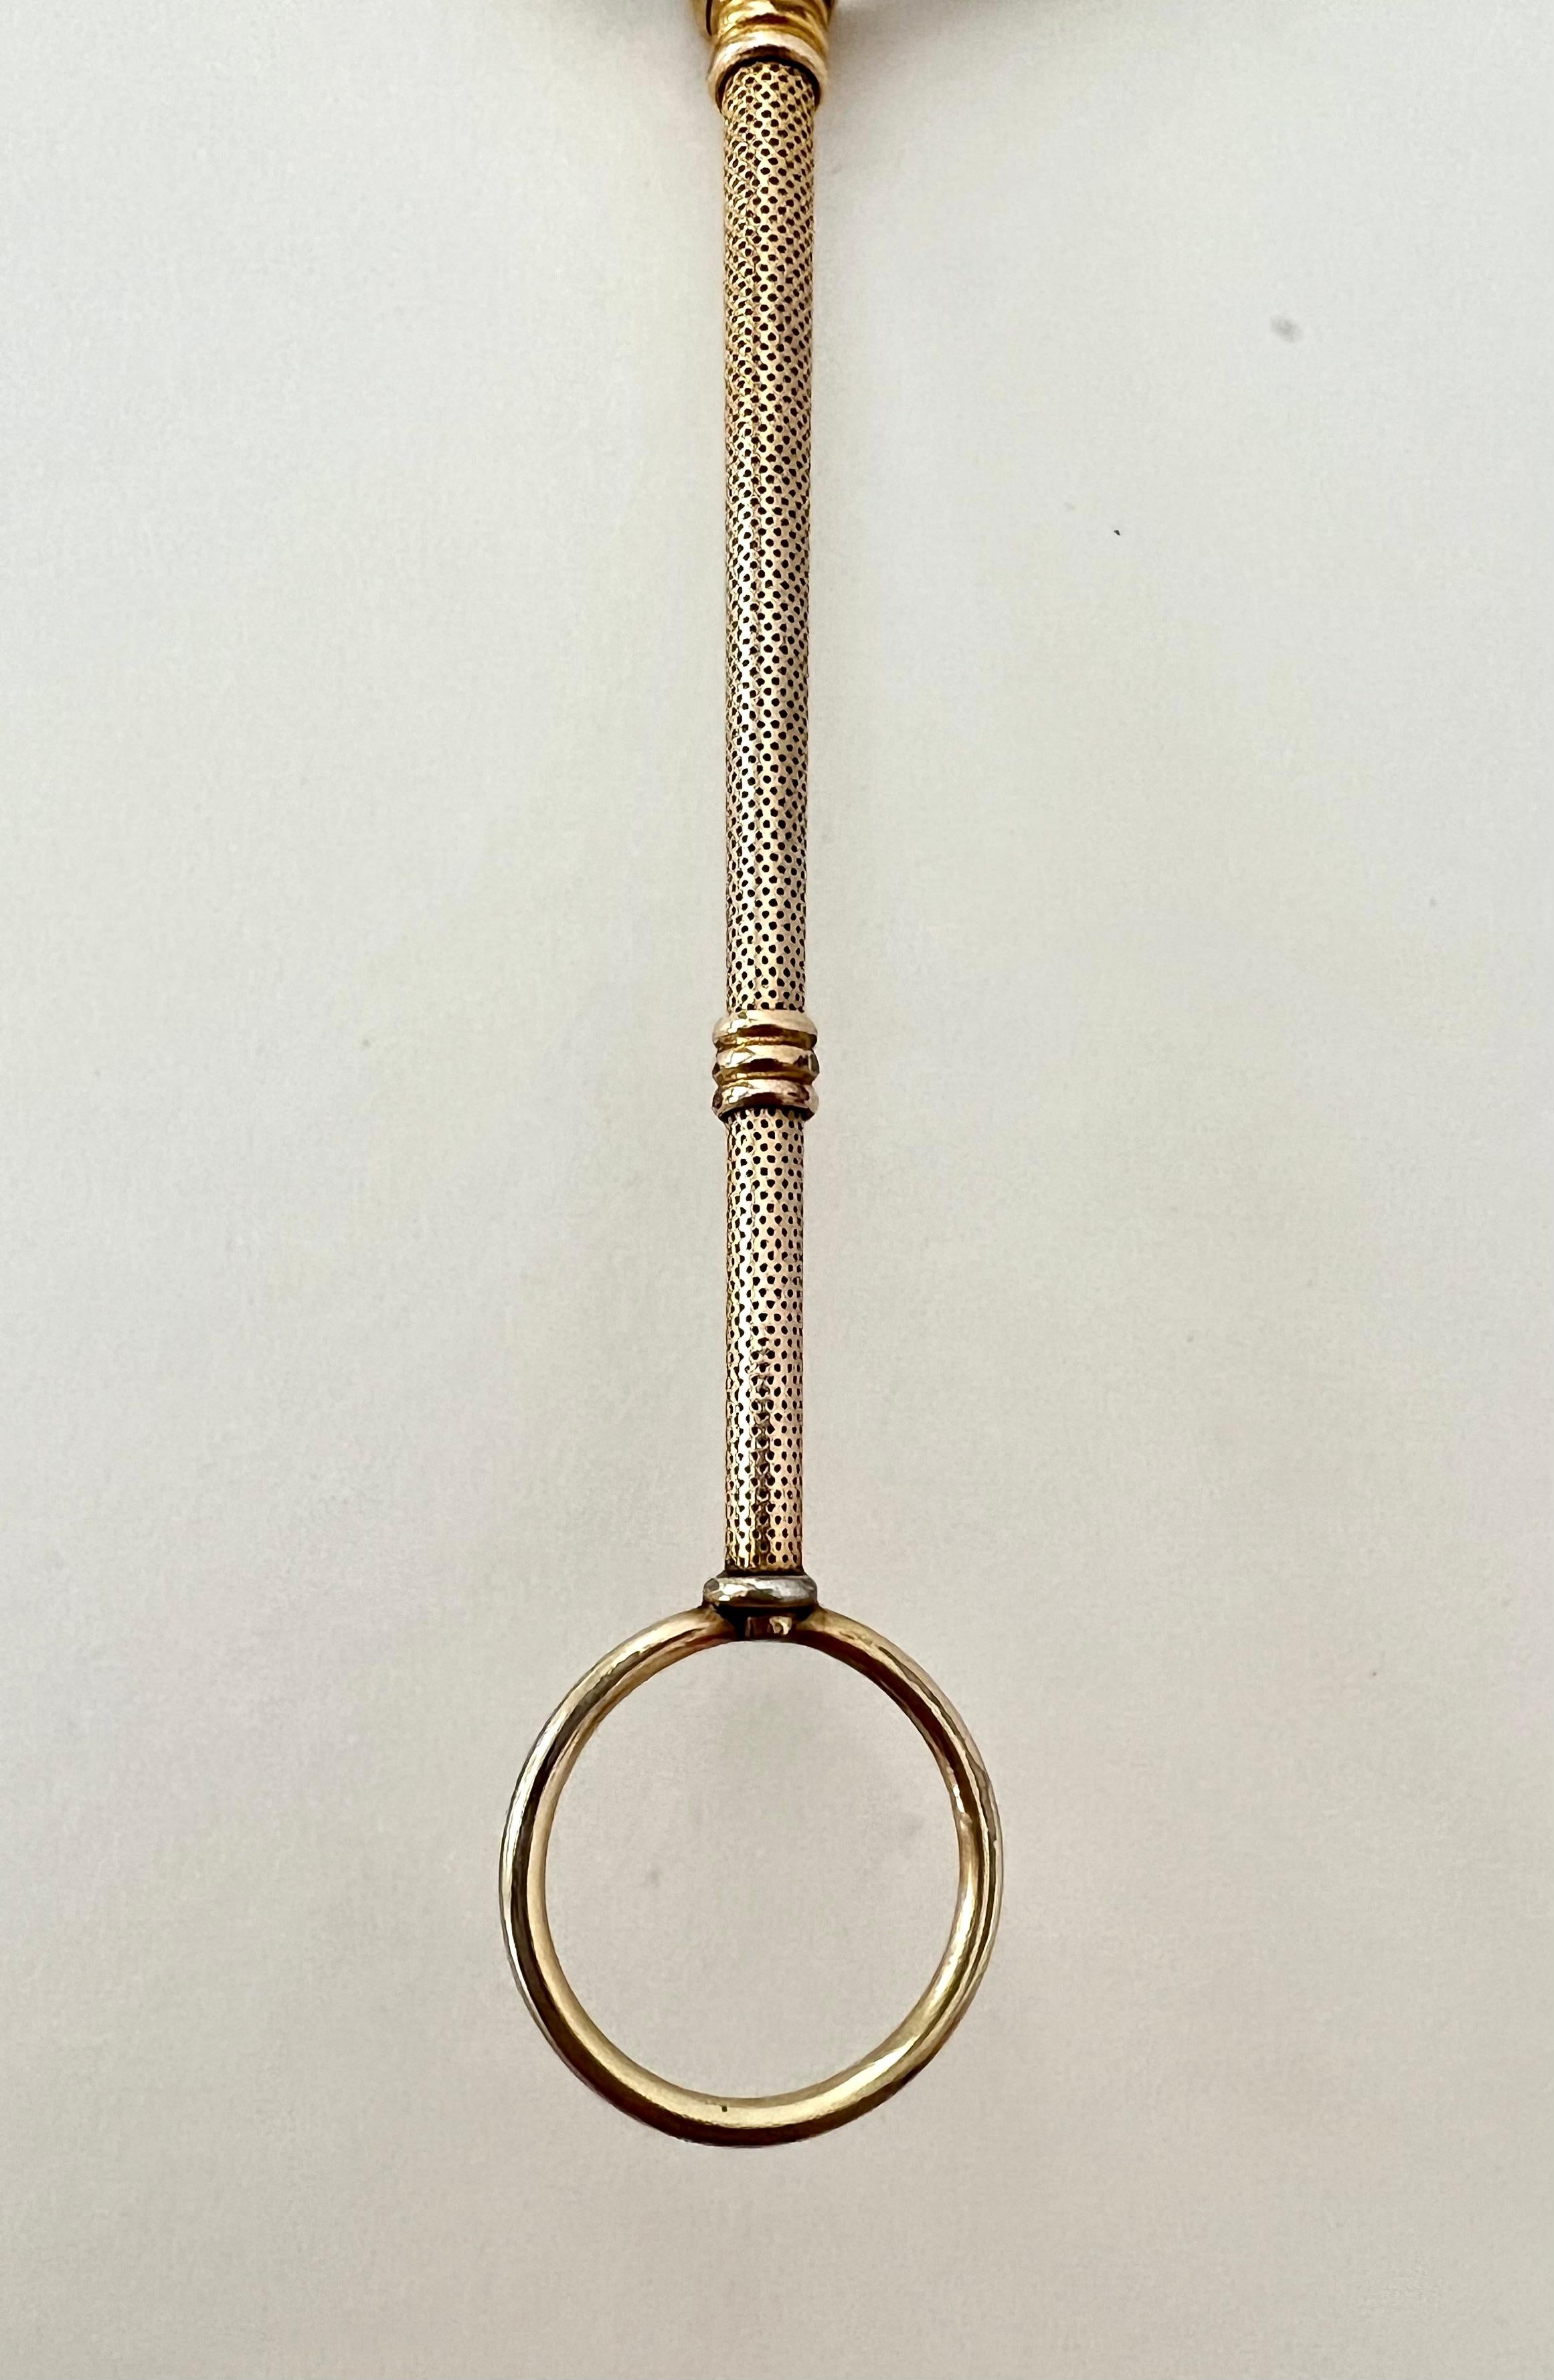 Gold Single Monocle Magnifyer Opening into a Lorgnette In Good Condition For Sale In Los Angeles, CA